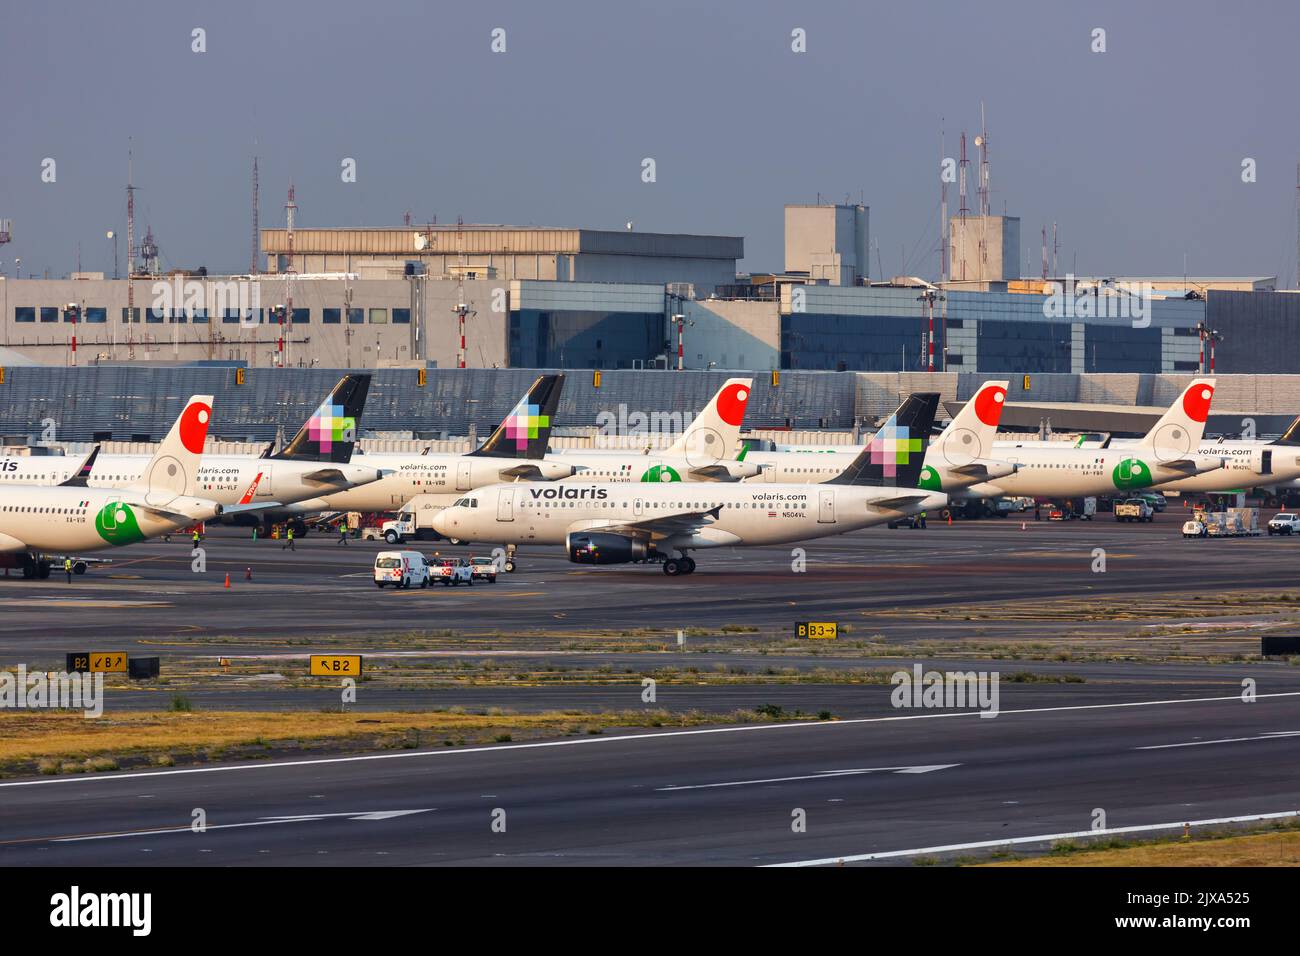 Mexico City, Mexico - April 14, 2022: Airbus airplanes at Mexico City airport (MEX) in Mexico. Stock Photo